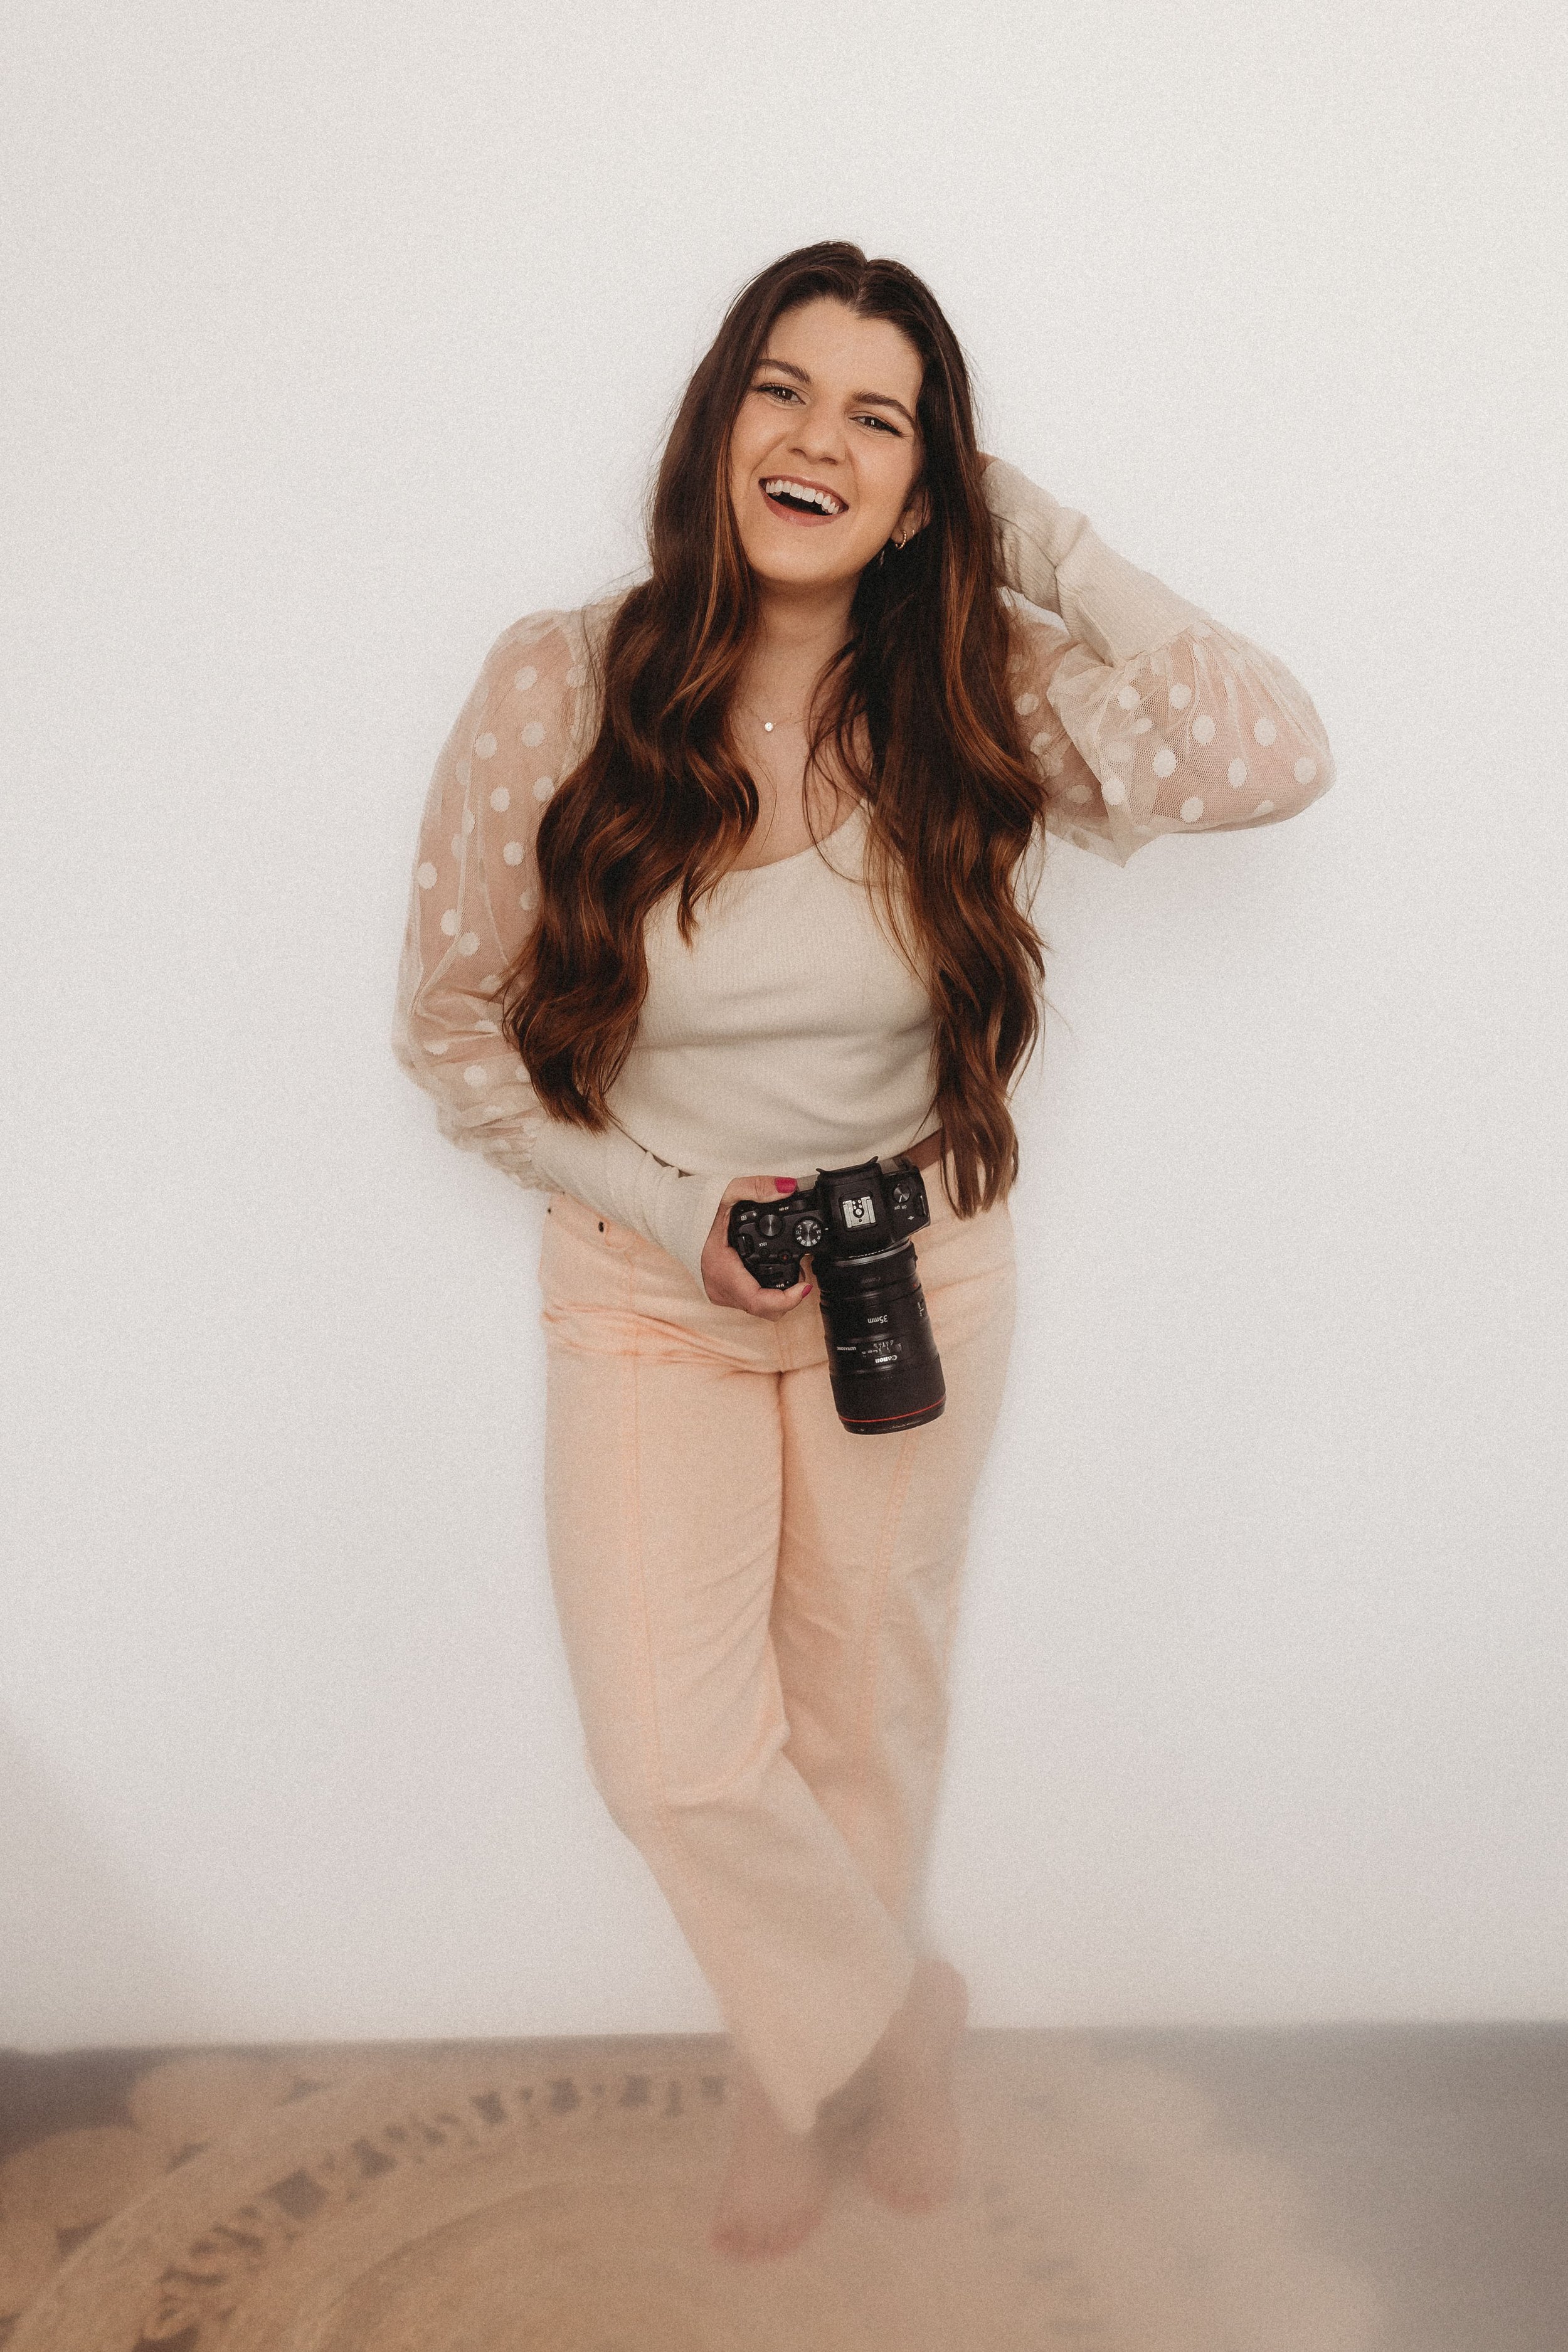  hannah laughs while holding her camera during her brand photos 